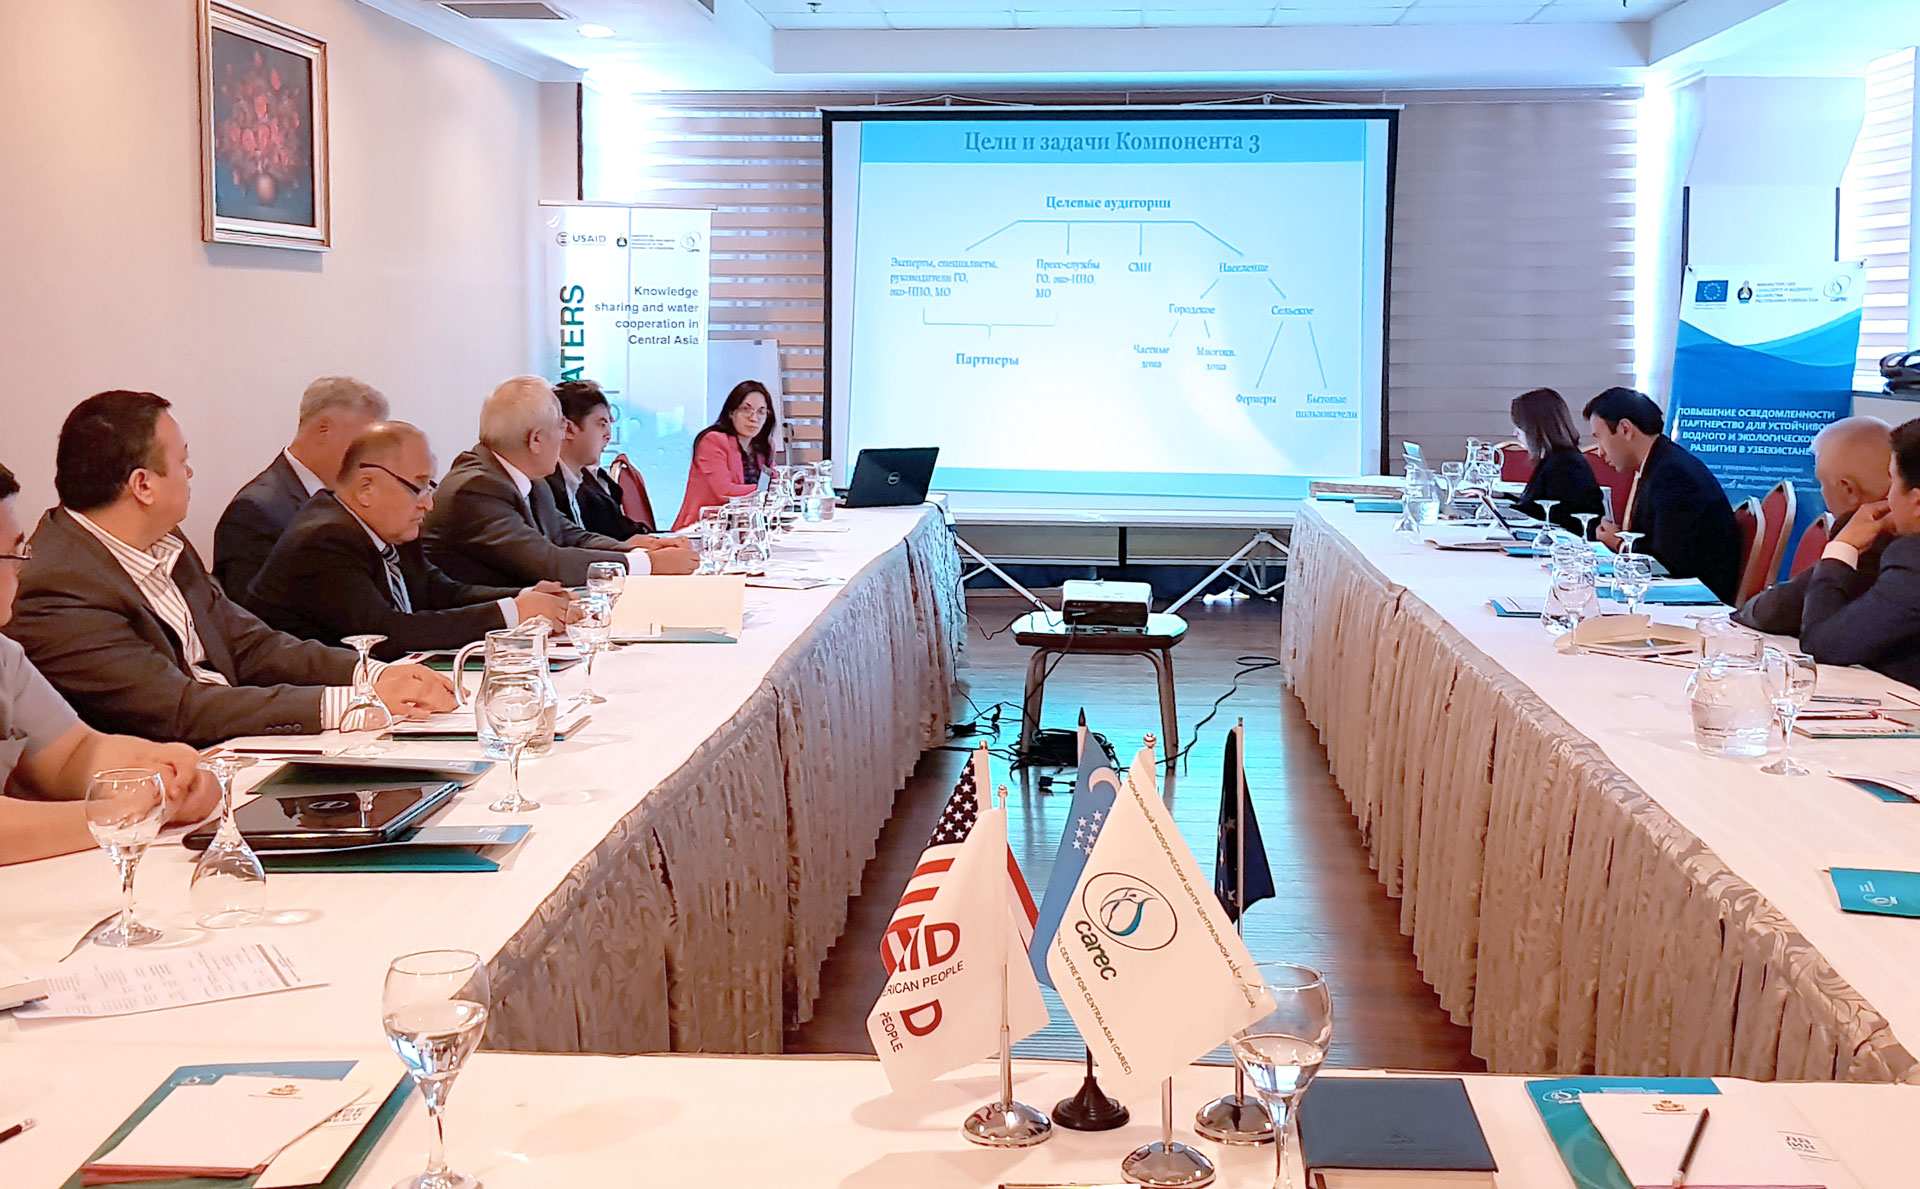 CAREC initiatives in the field of water management were presented in Tashkent